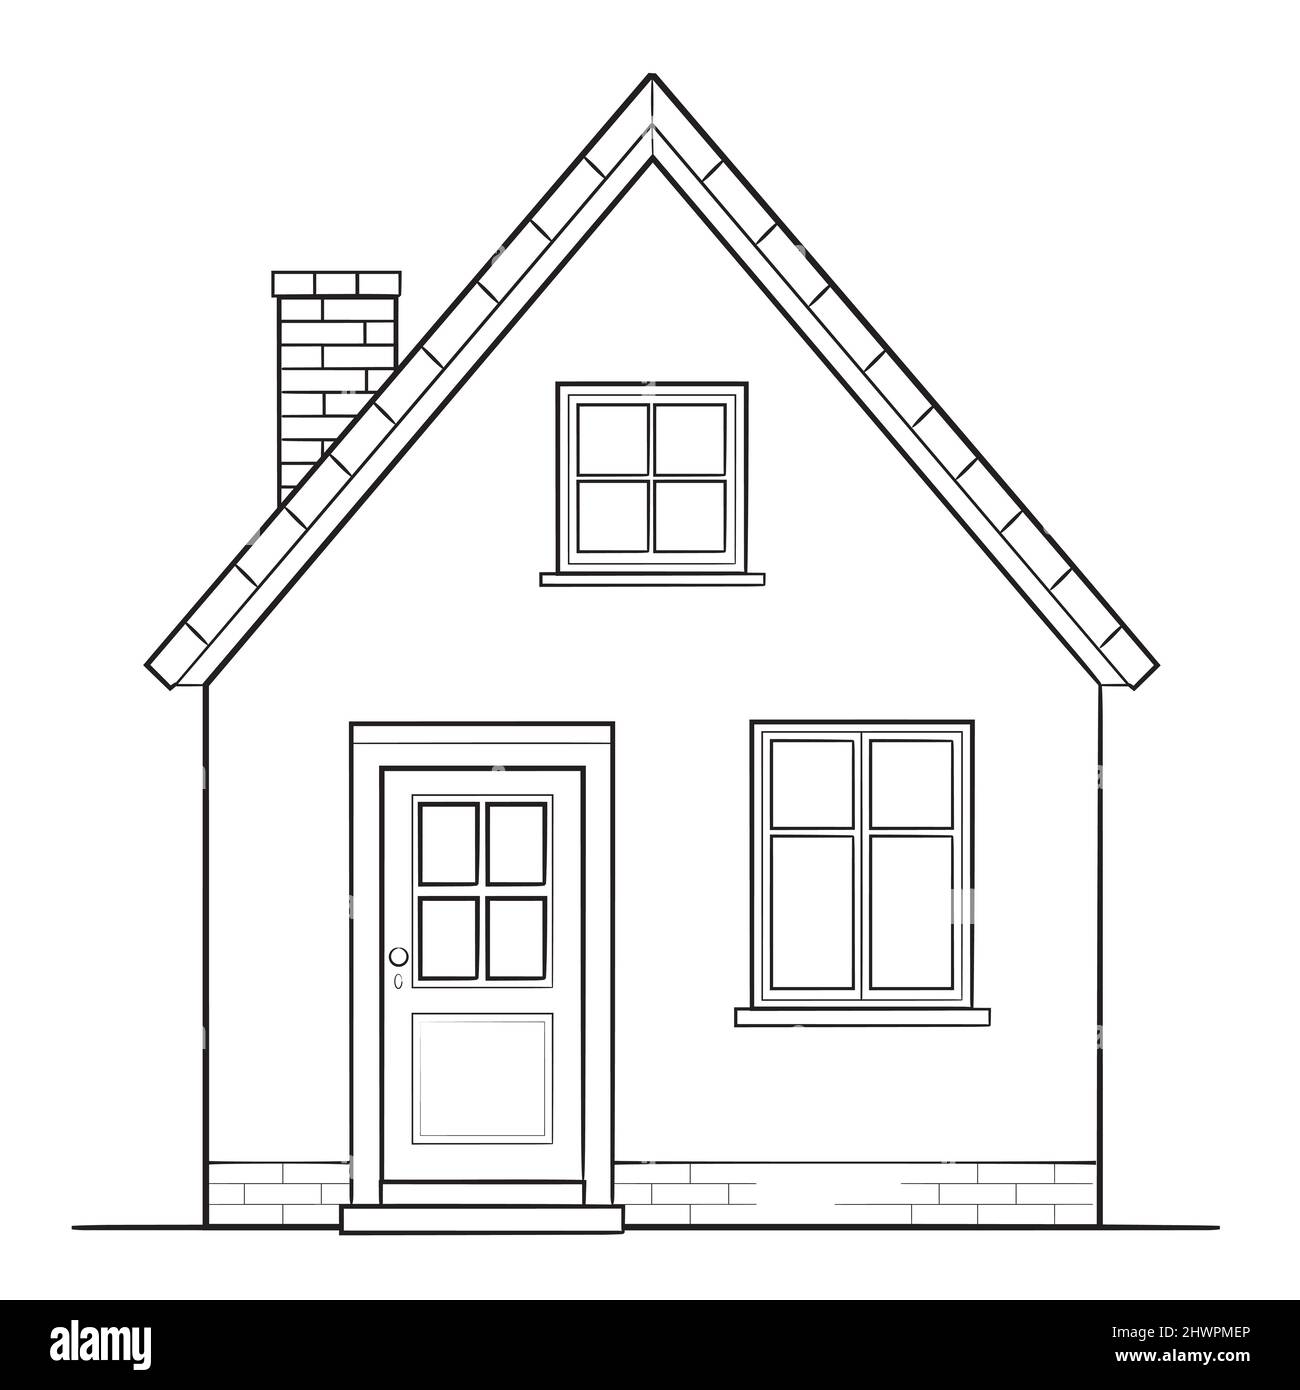 Classic family house - stock outline illustration of a building Stock Vector